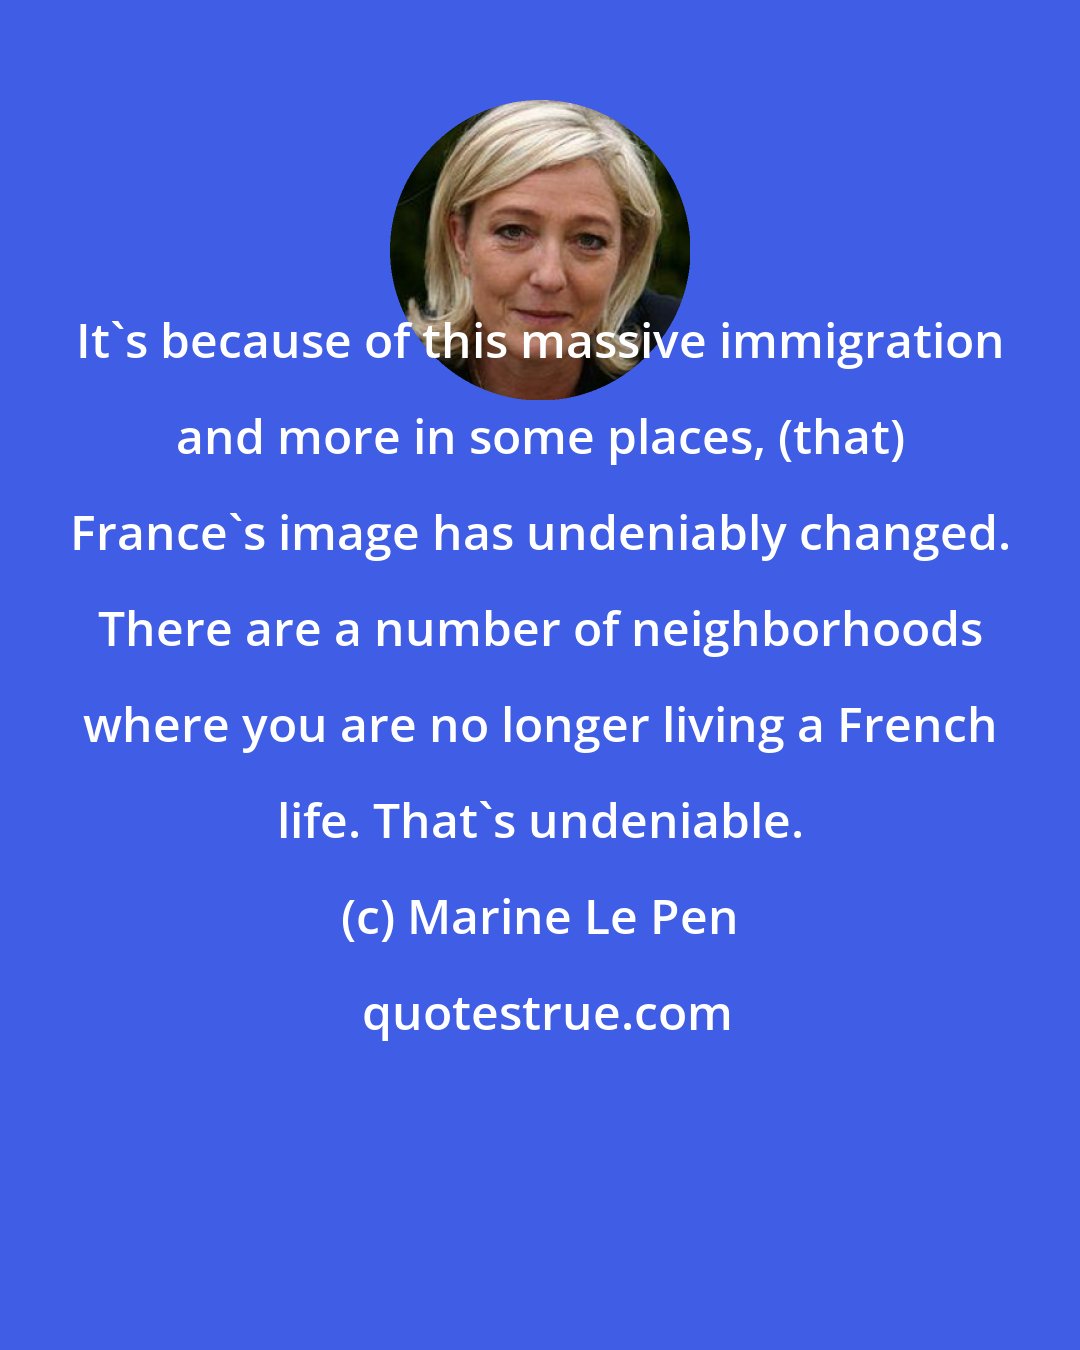 Marine Le Pen: It's because of this massive immigration and more in some places, (that) France's image has undeniably changed. There are a number of neighborhoods where you are no longer living a French life. That's undeniable.